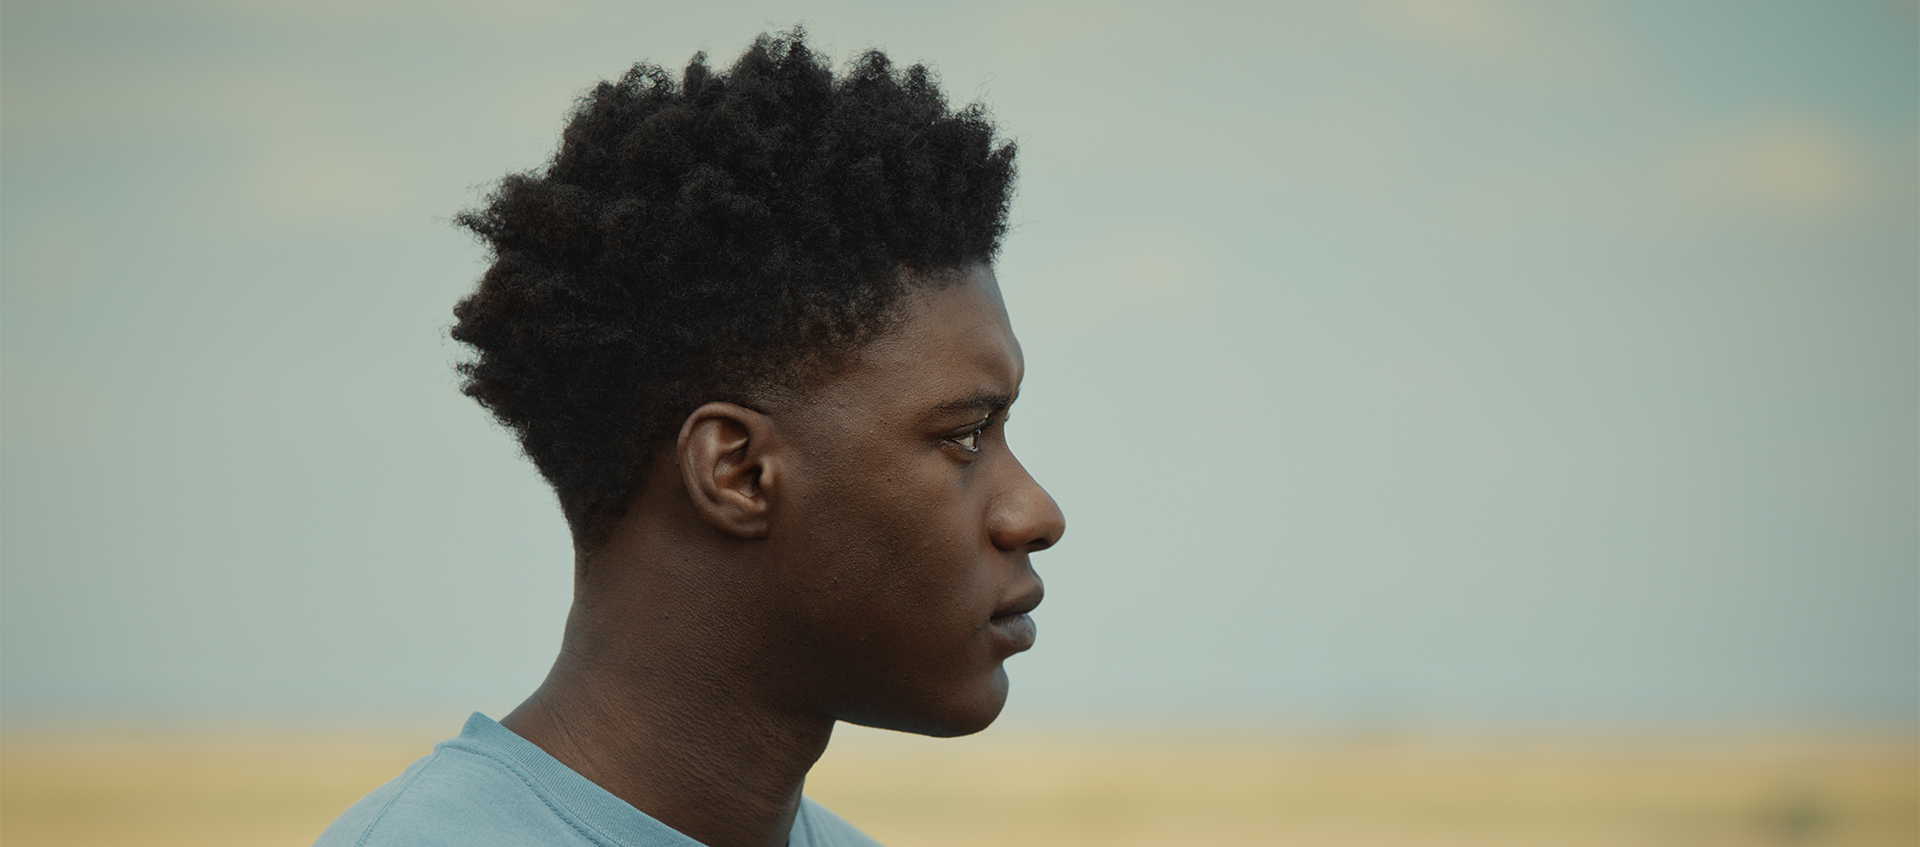 A teenaged Femi, shown in profile, looks off into the distance